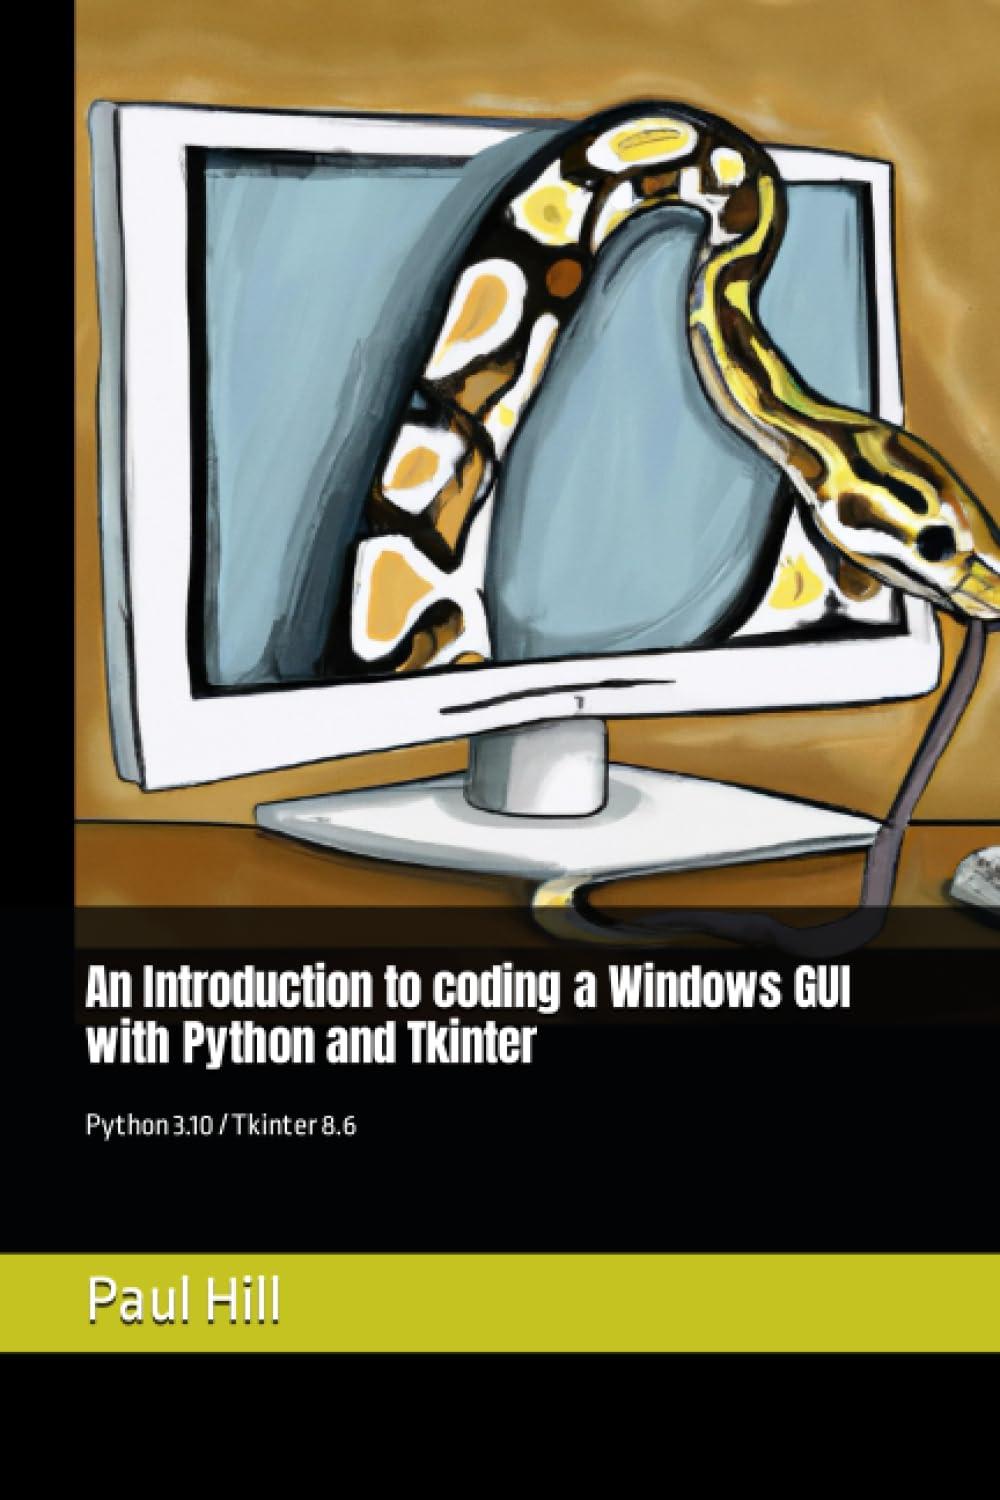 An Introduction To Coding A Windows GUI With Python And Tkinter Python 3.10